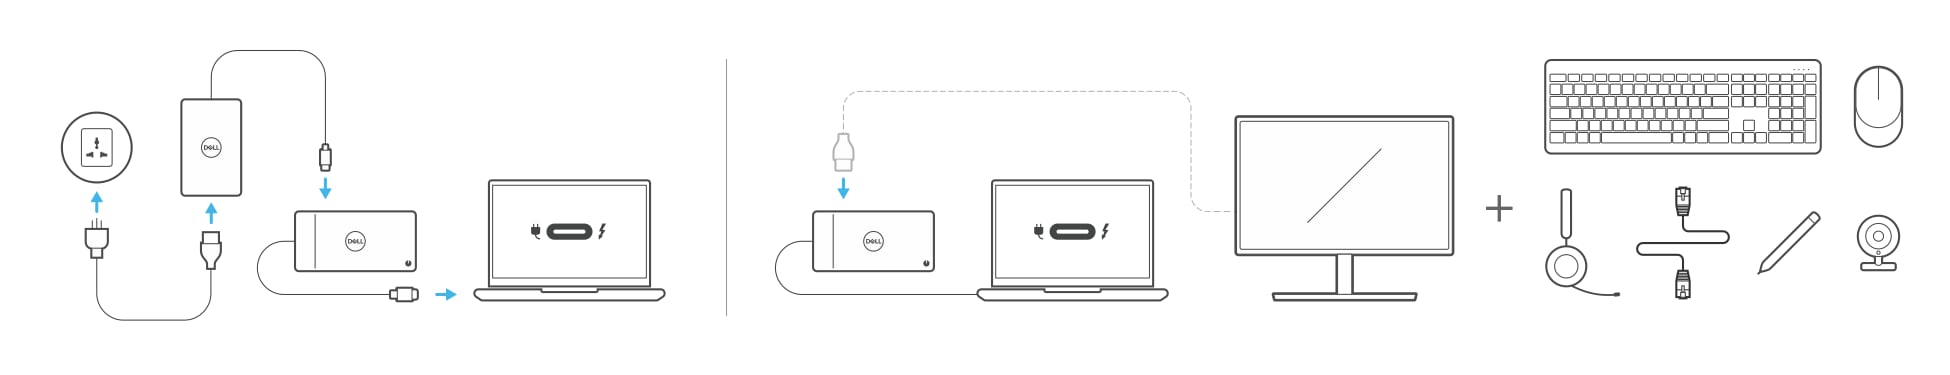 Connecting a docking station to your laptop